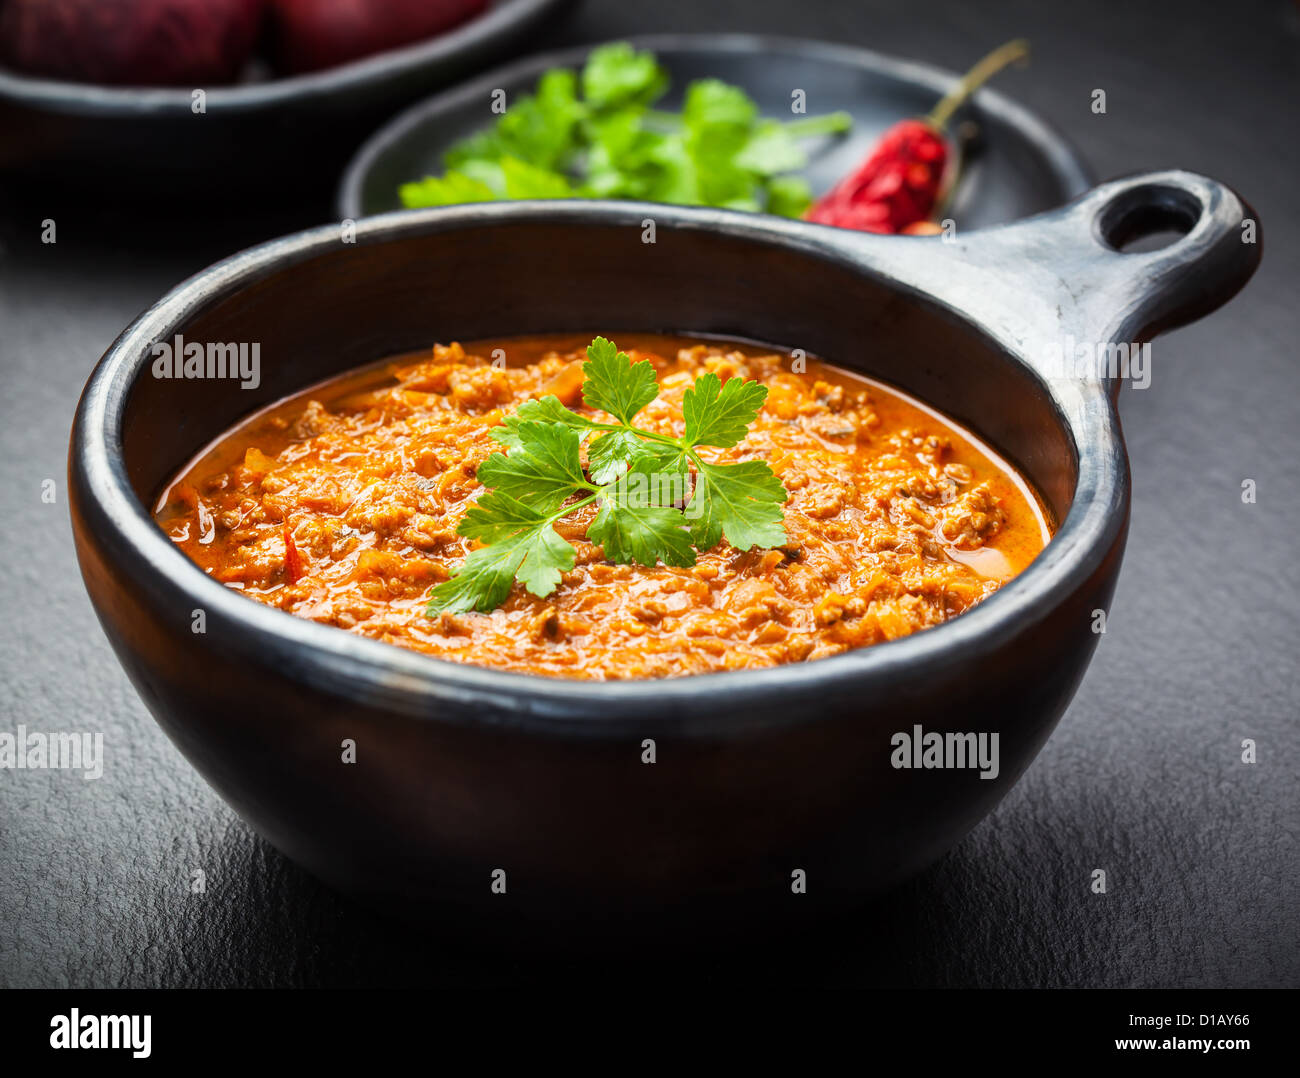 Hot chili con carne cooked in the pan Stock Photo